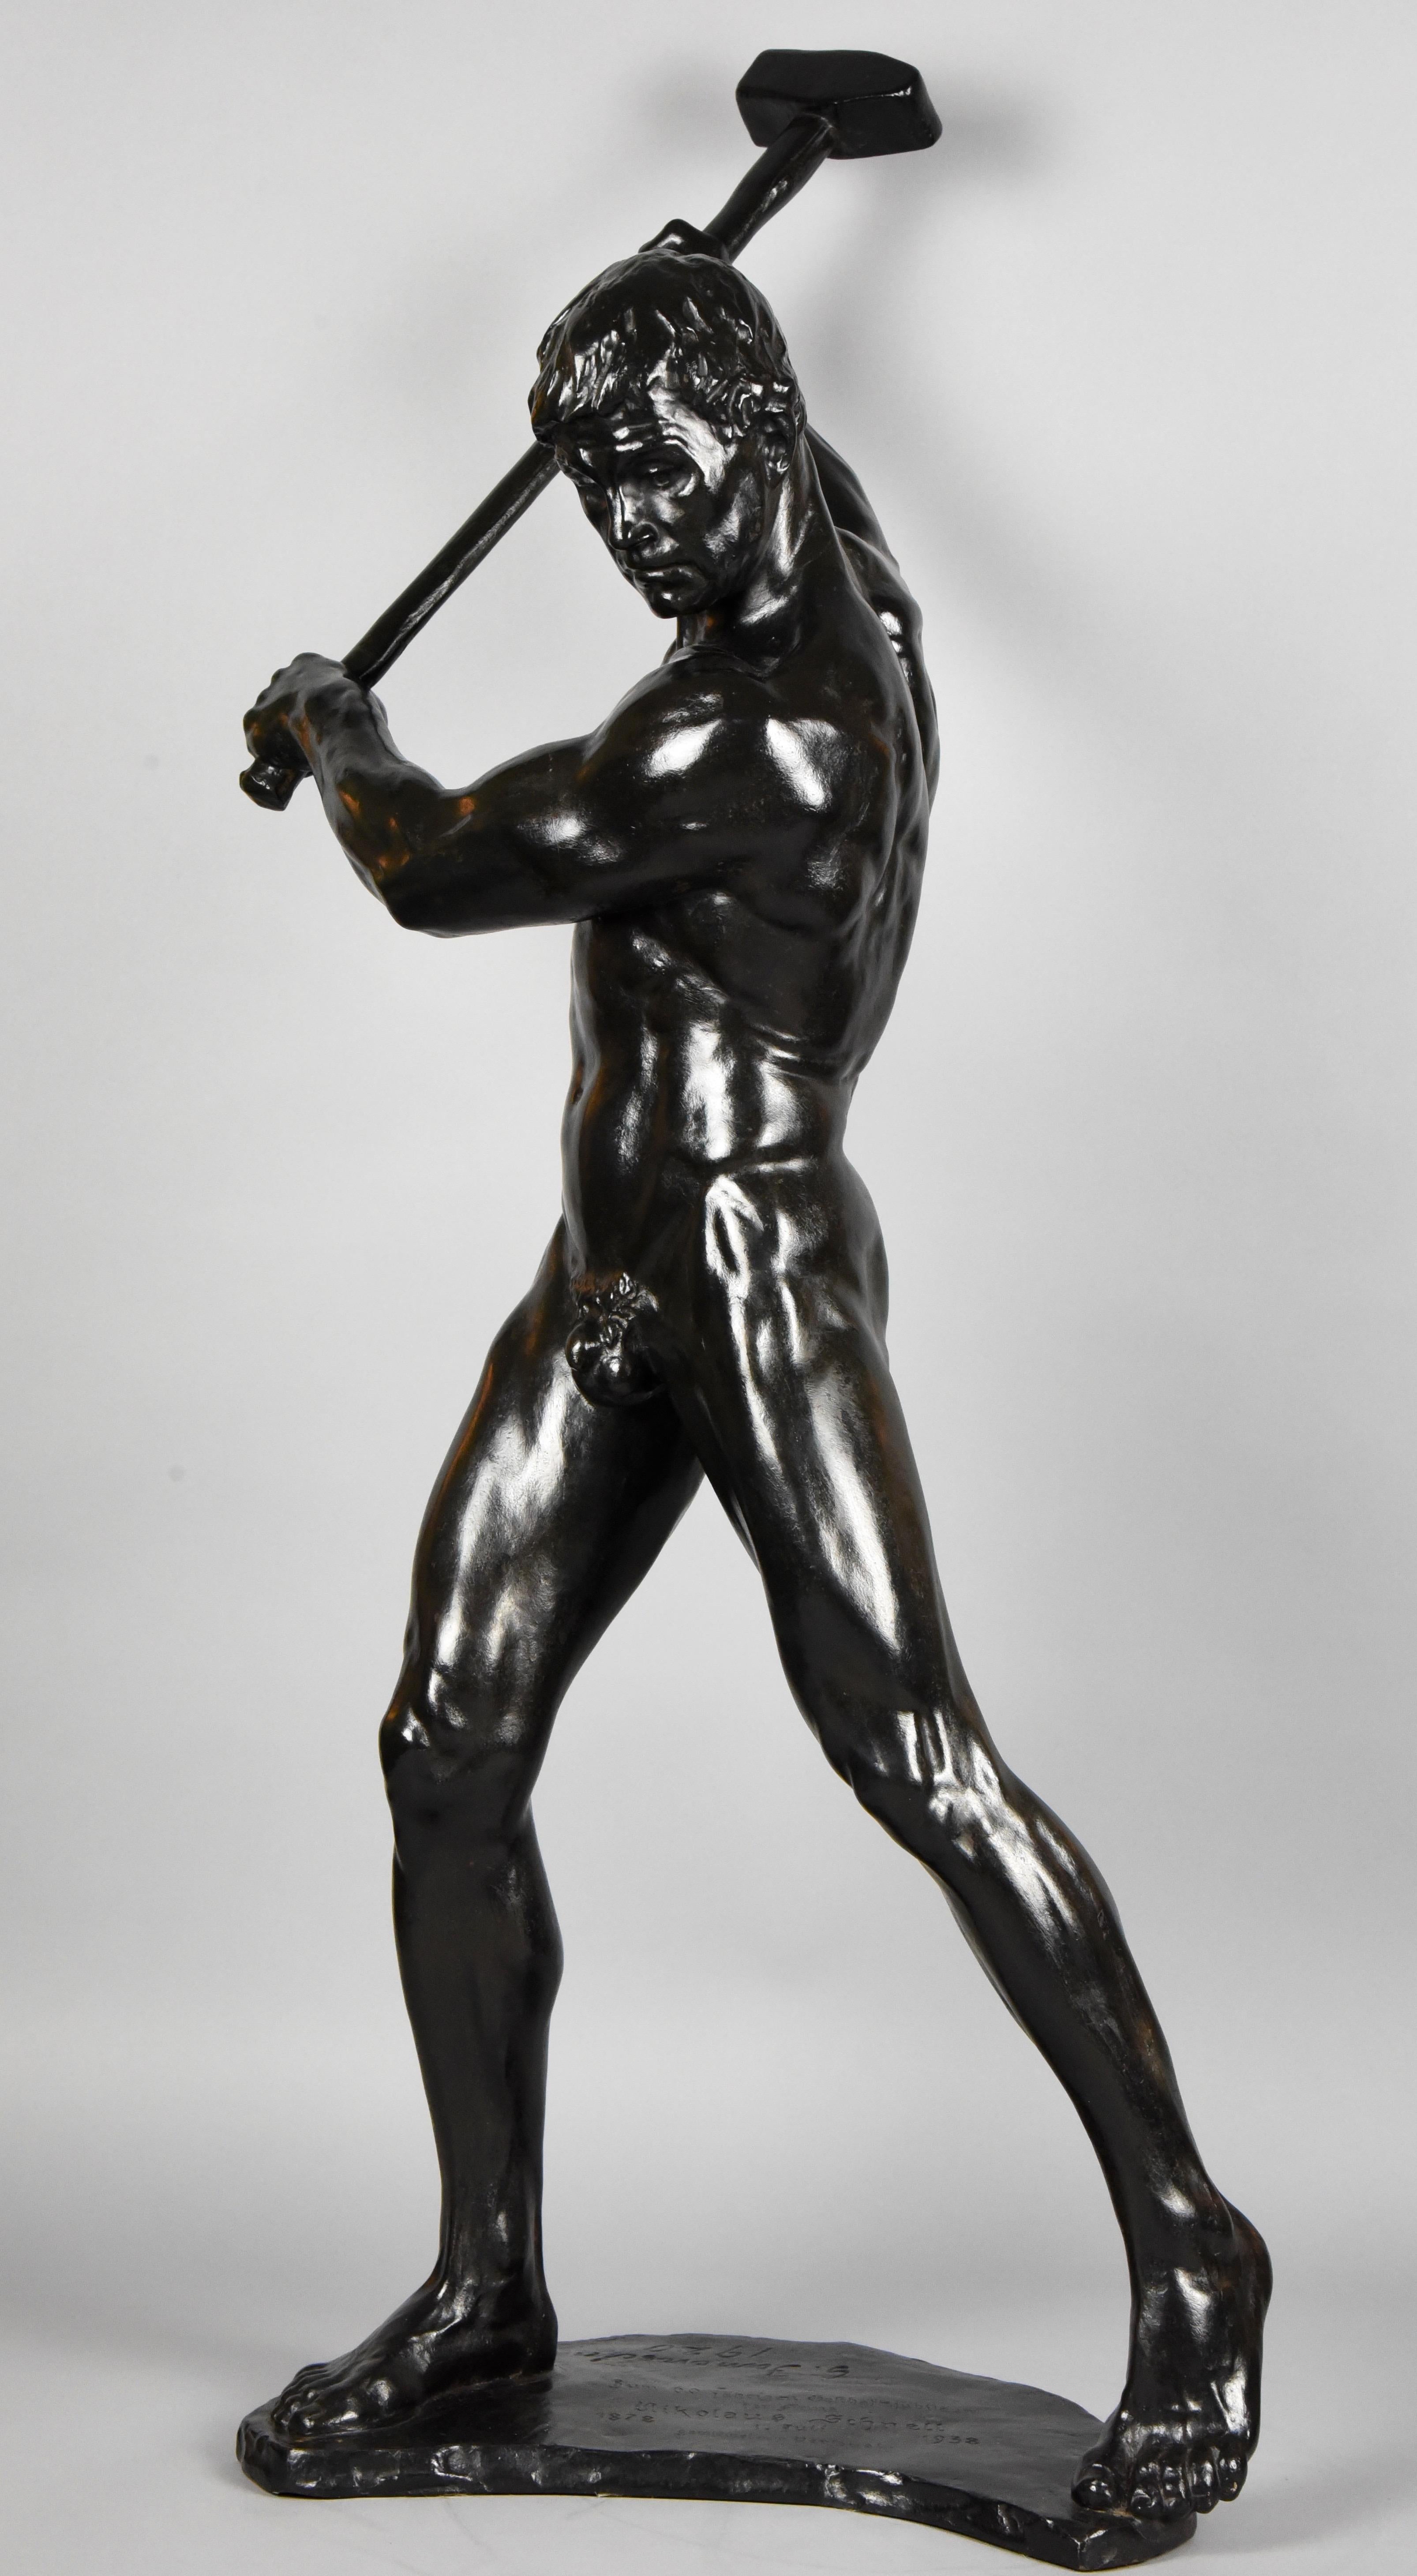 Impressive half size cast iron sculpture by Gerhard Adolf Janensch of a male nude with sledgehammer, dated 1920. The artist was born in Berlin in 1860, died in 1933. Work in musea in Germany. 
Literature:
“Bronzes, sculptors and founders” by H.